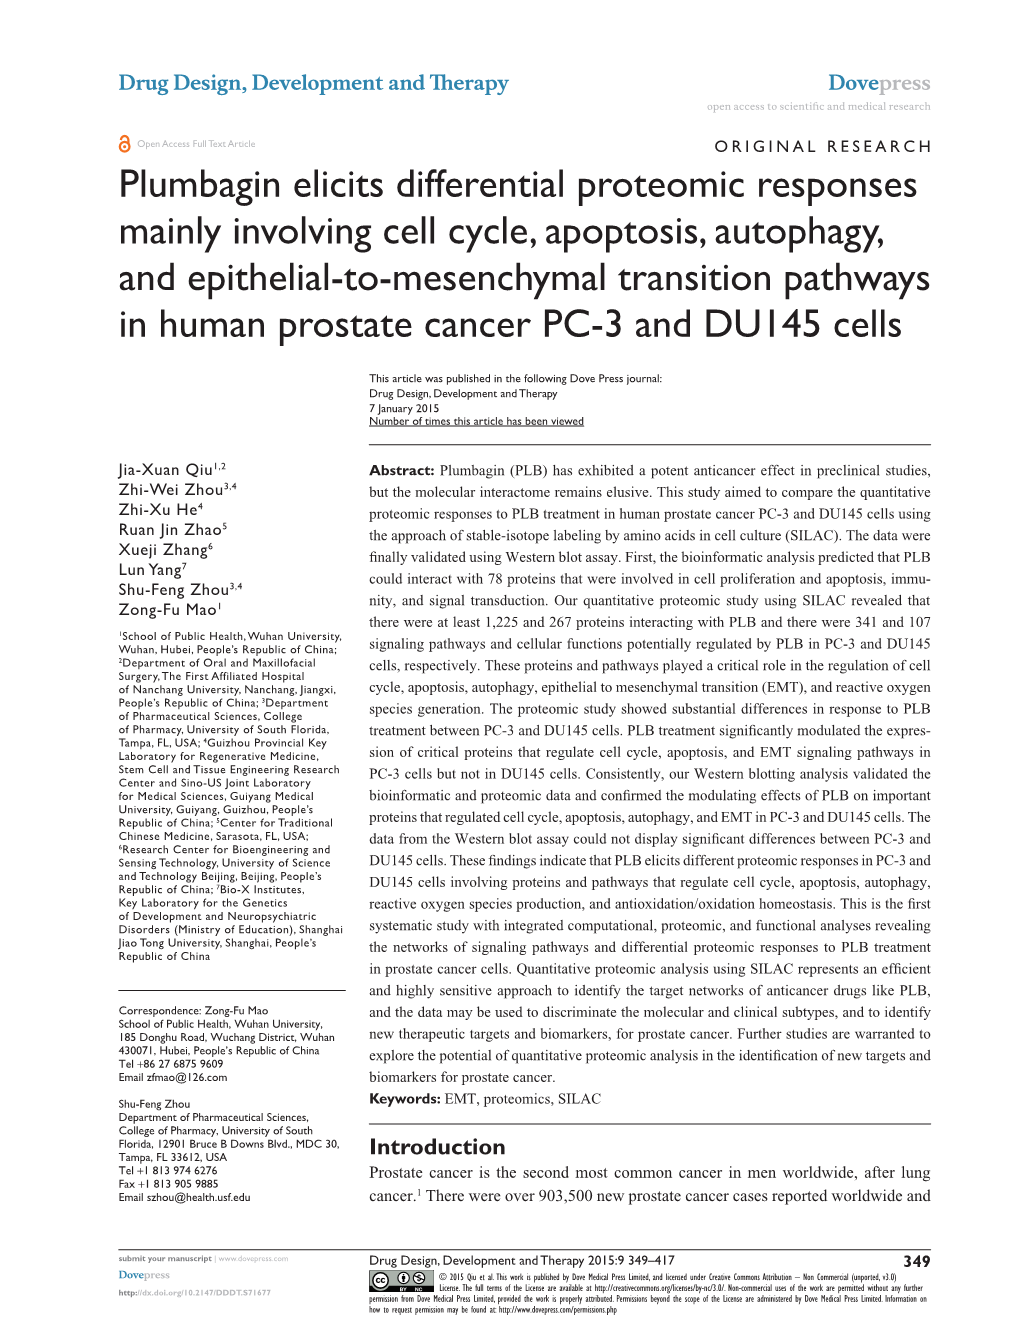 Plumbagin Elicits Differential Proteomic Responses Mainly